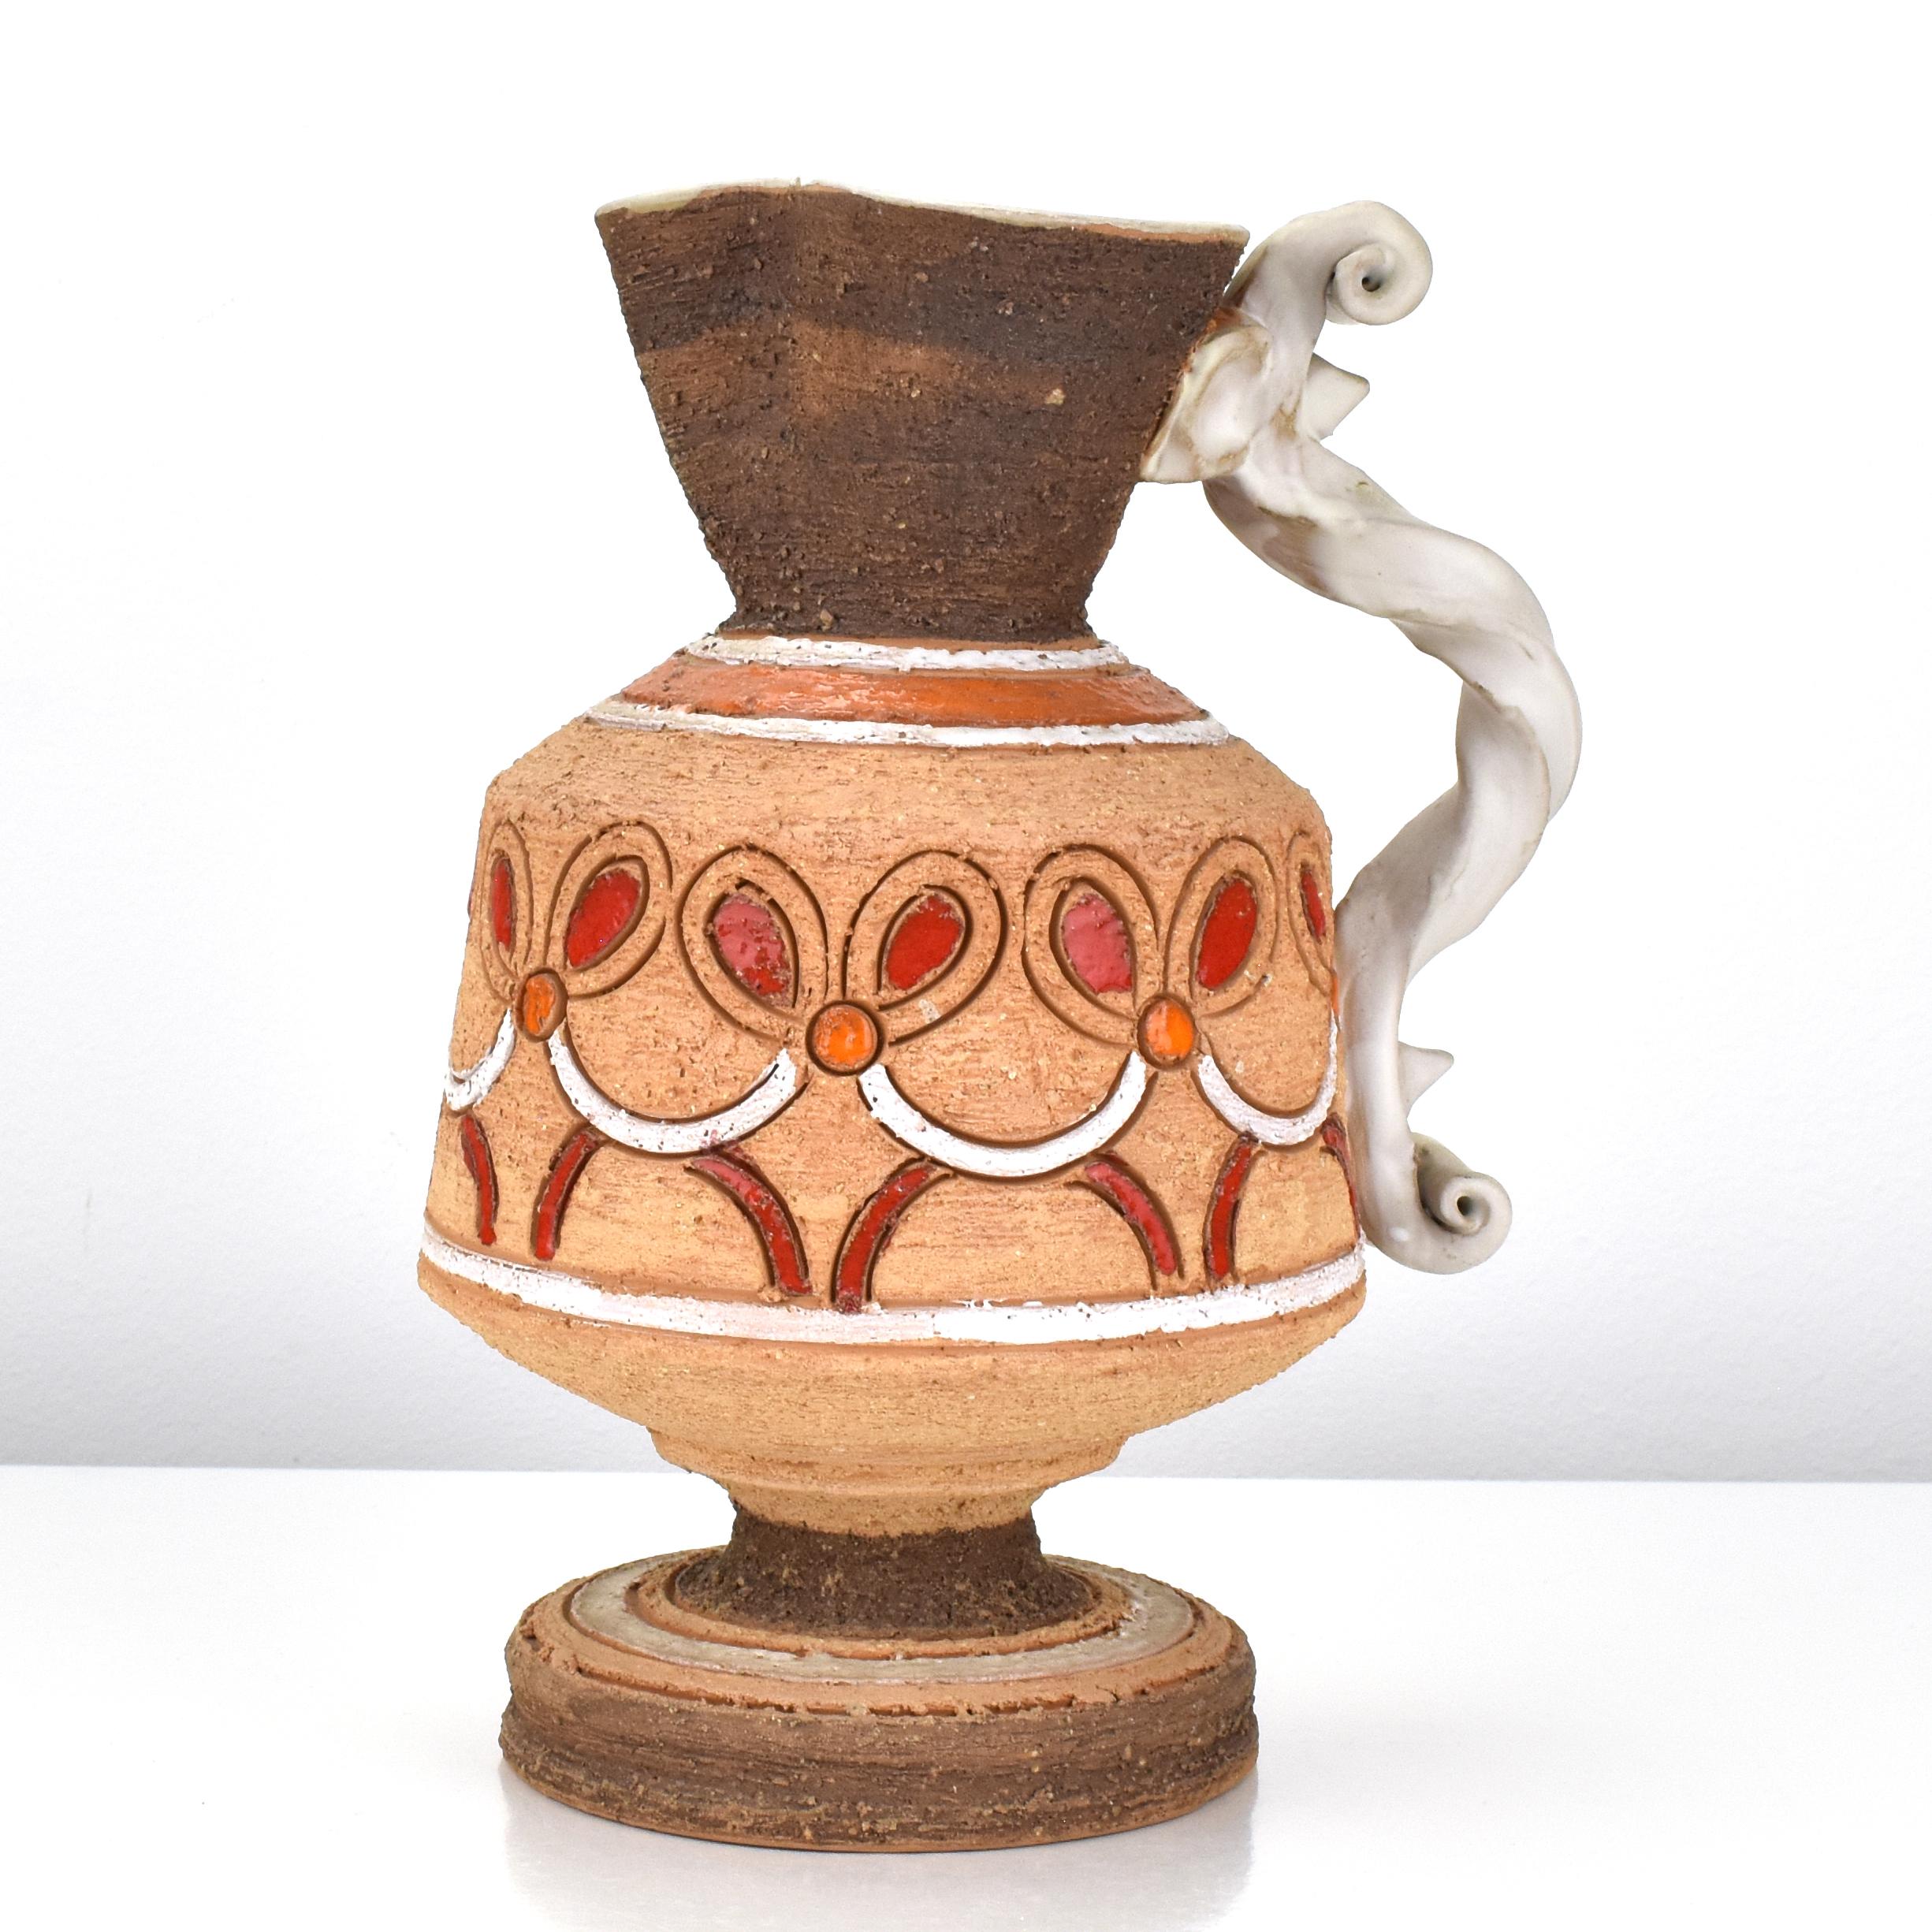 A lovely Moroccan style art pottery vase by Fratelli Fanciullacci from the 1960s, made of brown chamotte clay with incised decoration in Sgraffito technique with an applied twisted handle glazed in beige.

The vase is hand-thrown, with a slightly